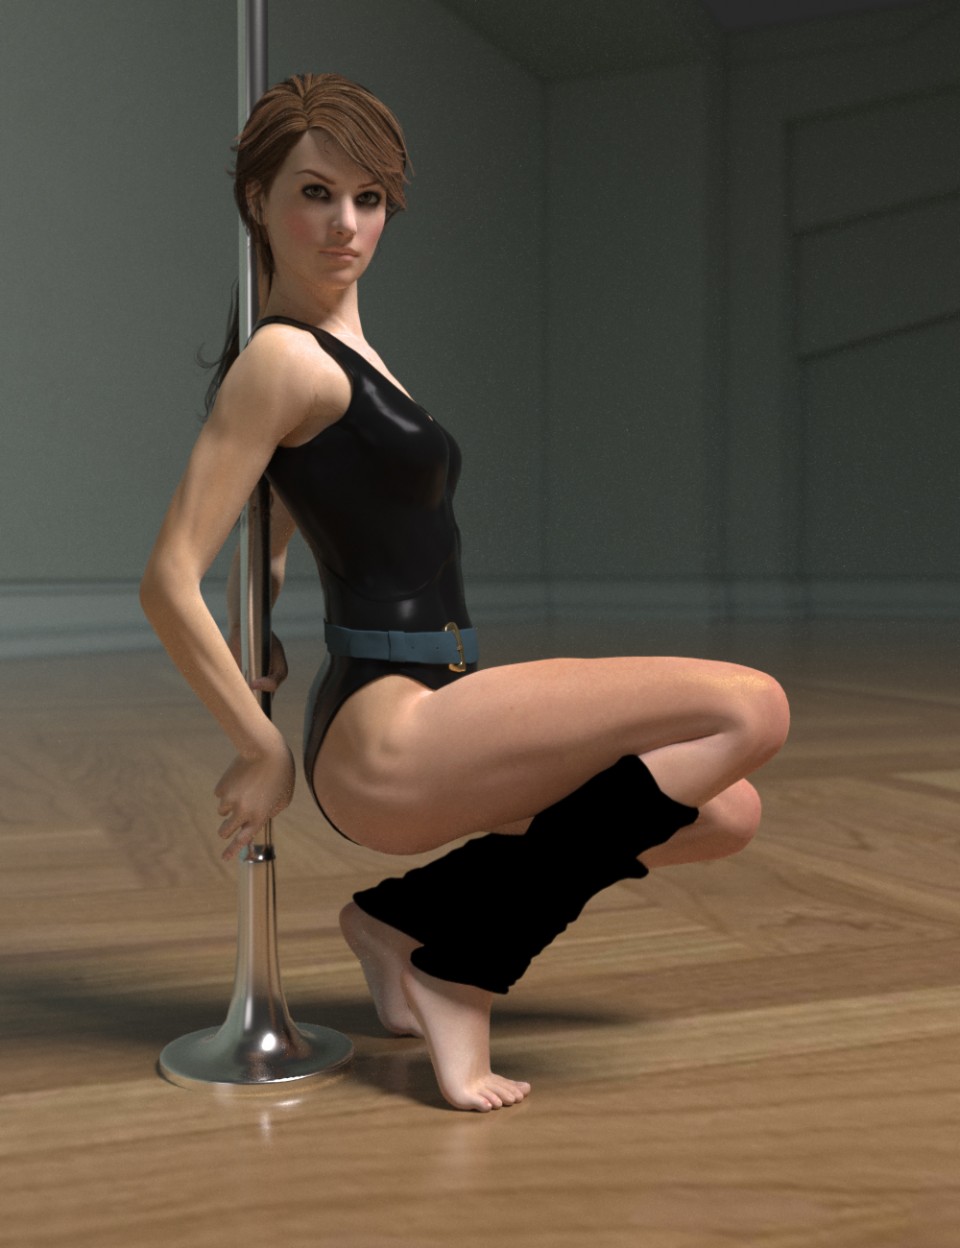 Fitness Pole Dance Poses and Prop for Genesis 2 Female(s)_DAZ3D下载站